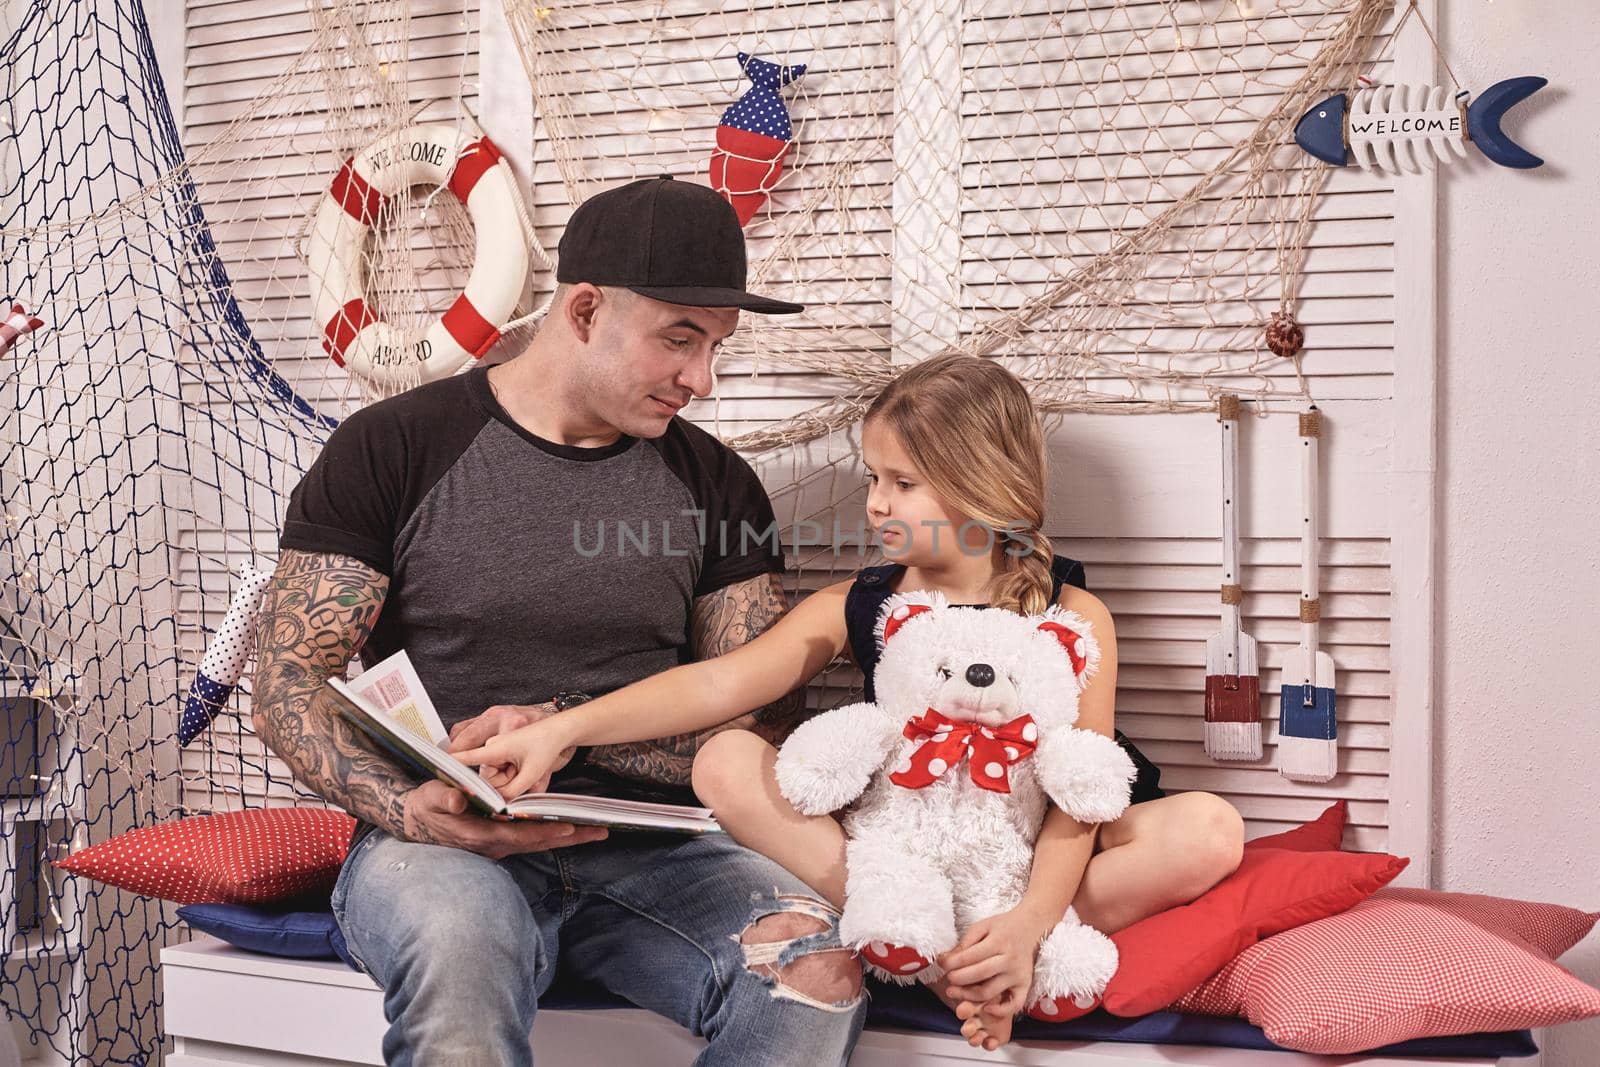 Handsome tattoed man in a cap is spending time with his little cute daughter. They are sitting on a white bench with some red pillows, in a room decorated in a marine style. She is holding a toy bear and pointing on something in a book. Reading fairytales while daughter is sitting nearby. Happy family.